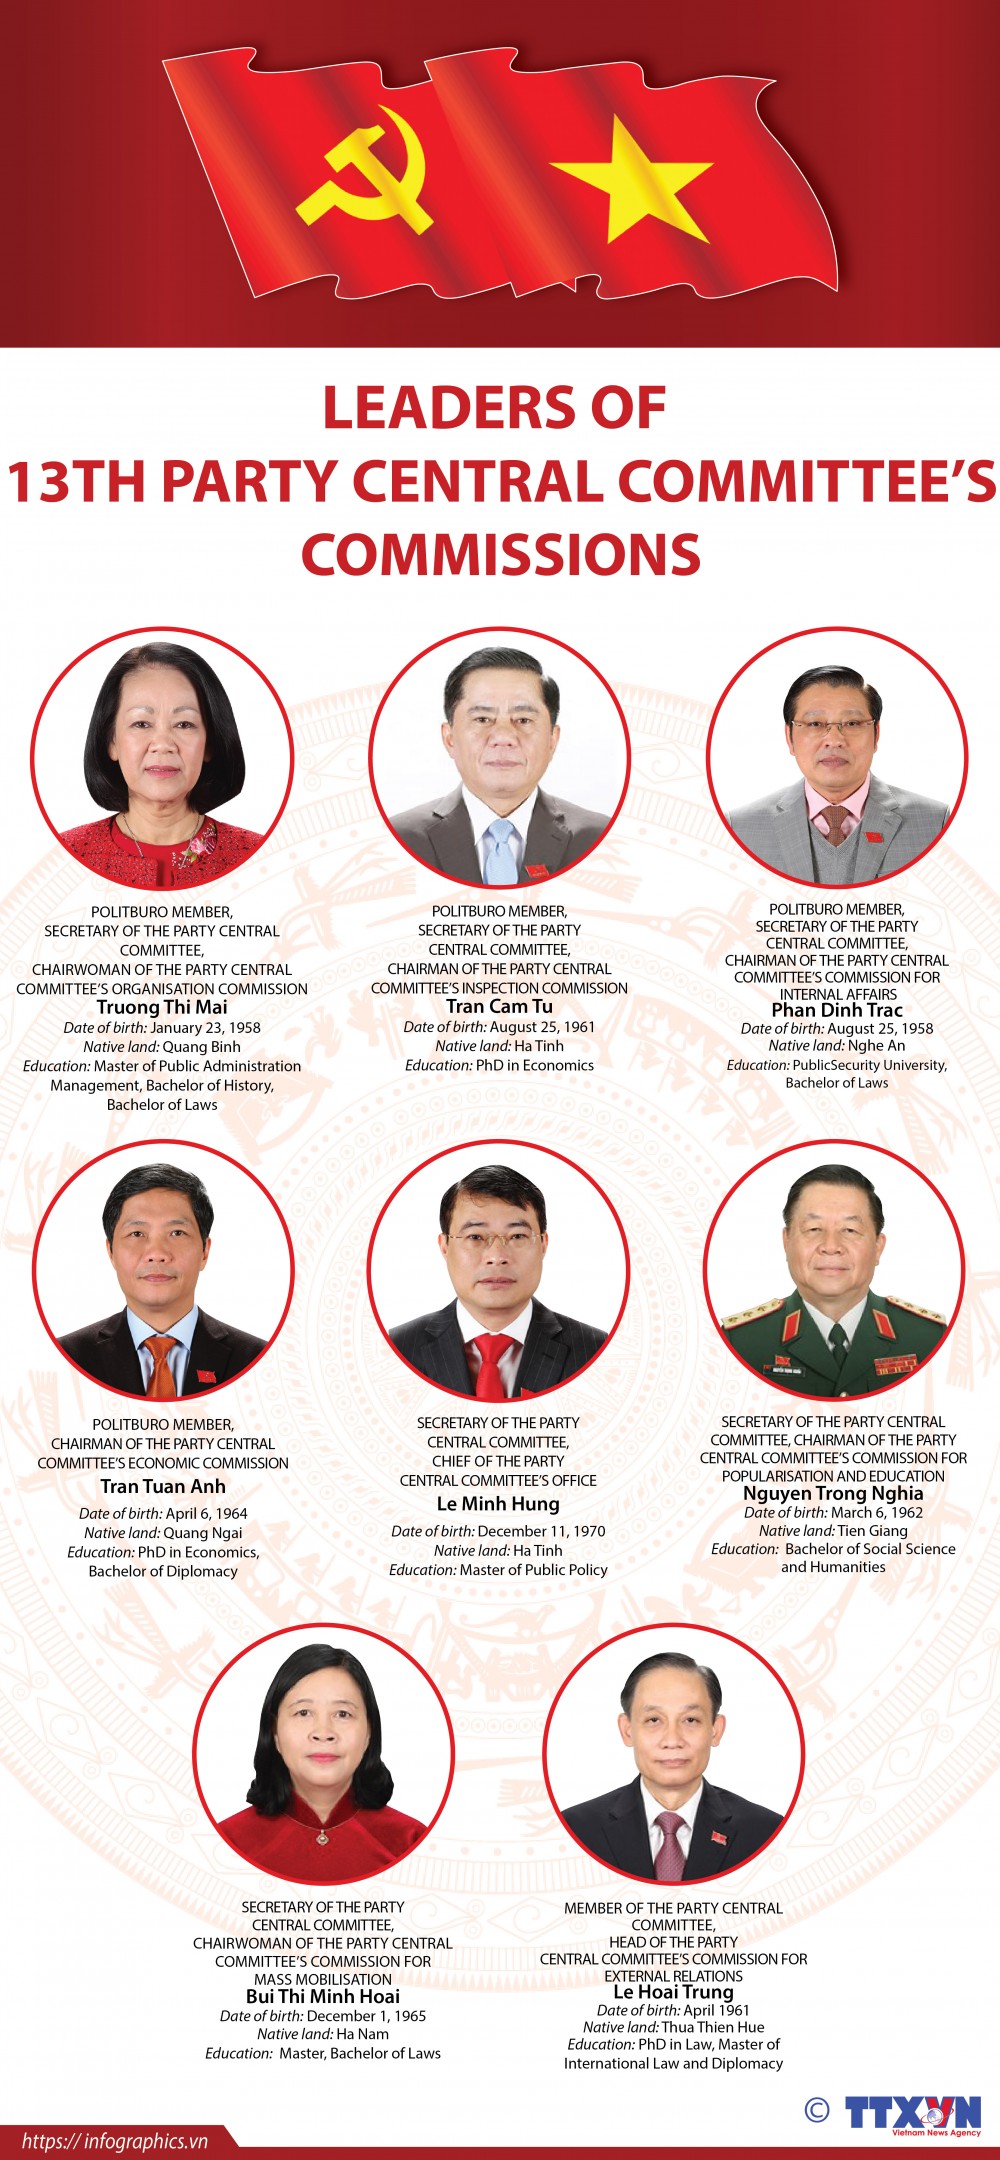 Leaders of 13th Party Central Committee’s Commissions